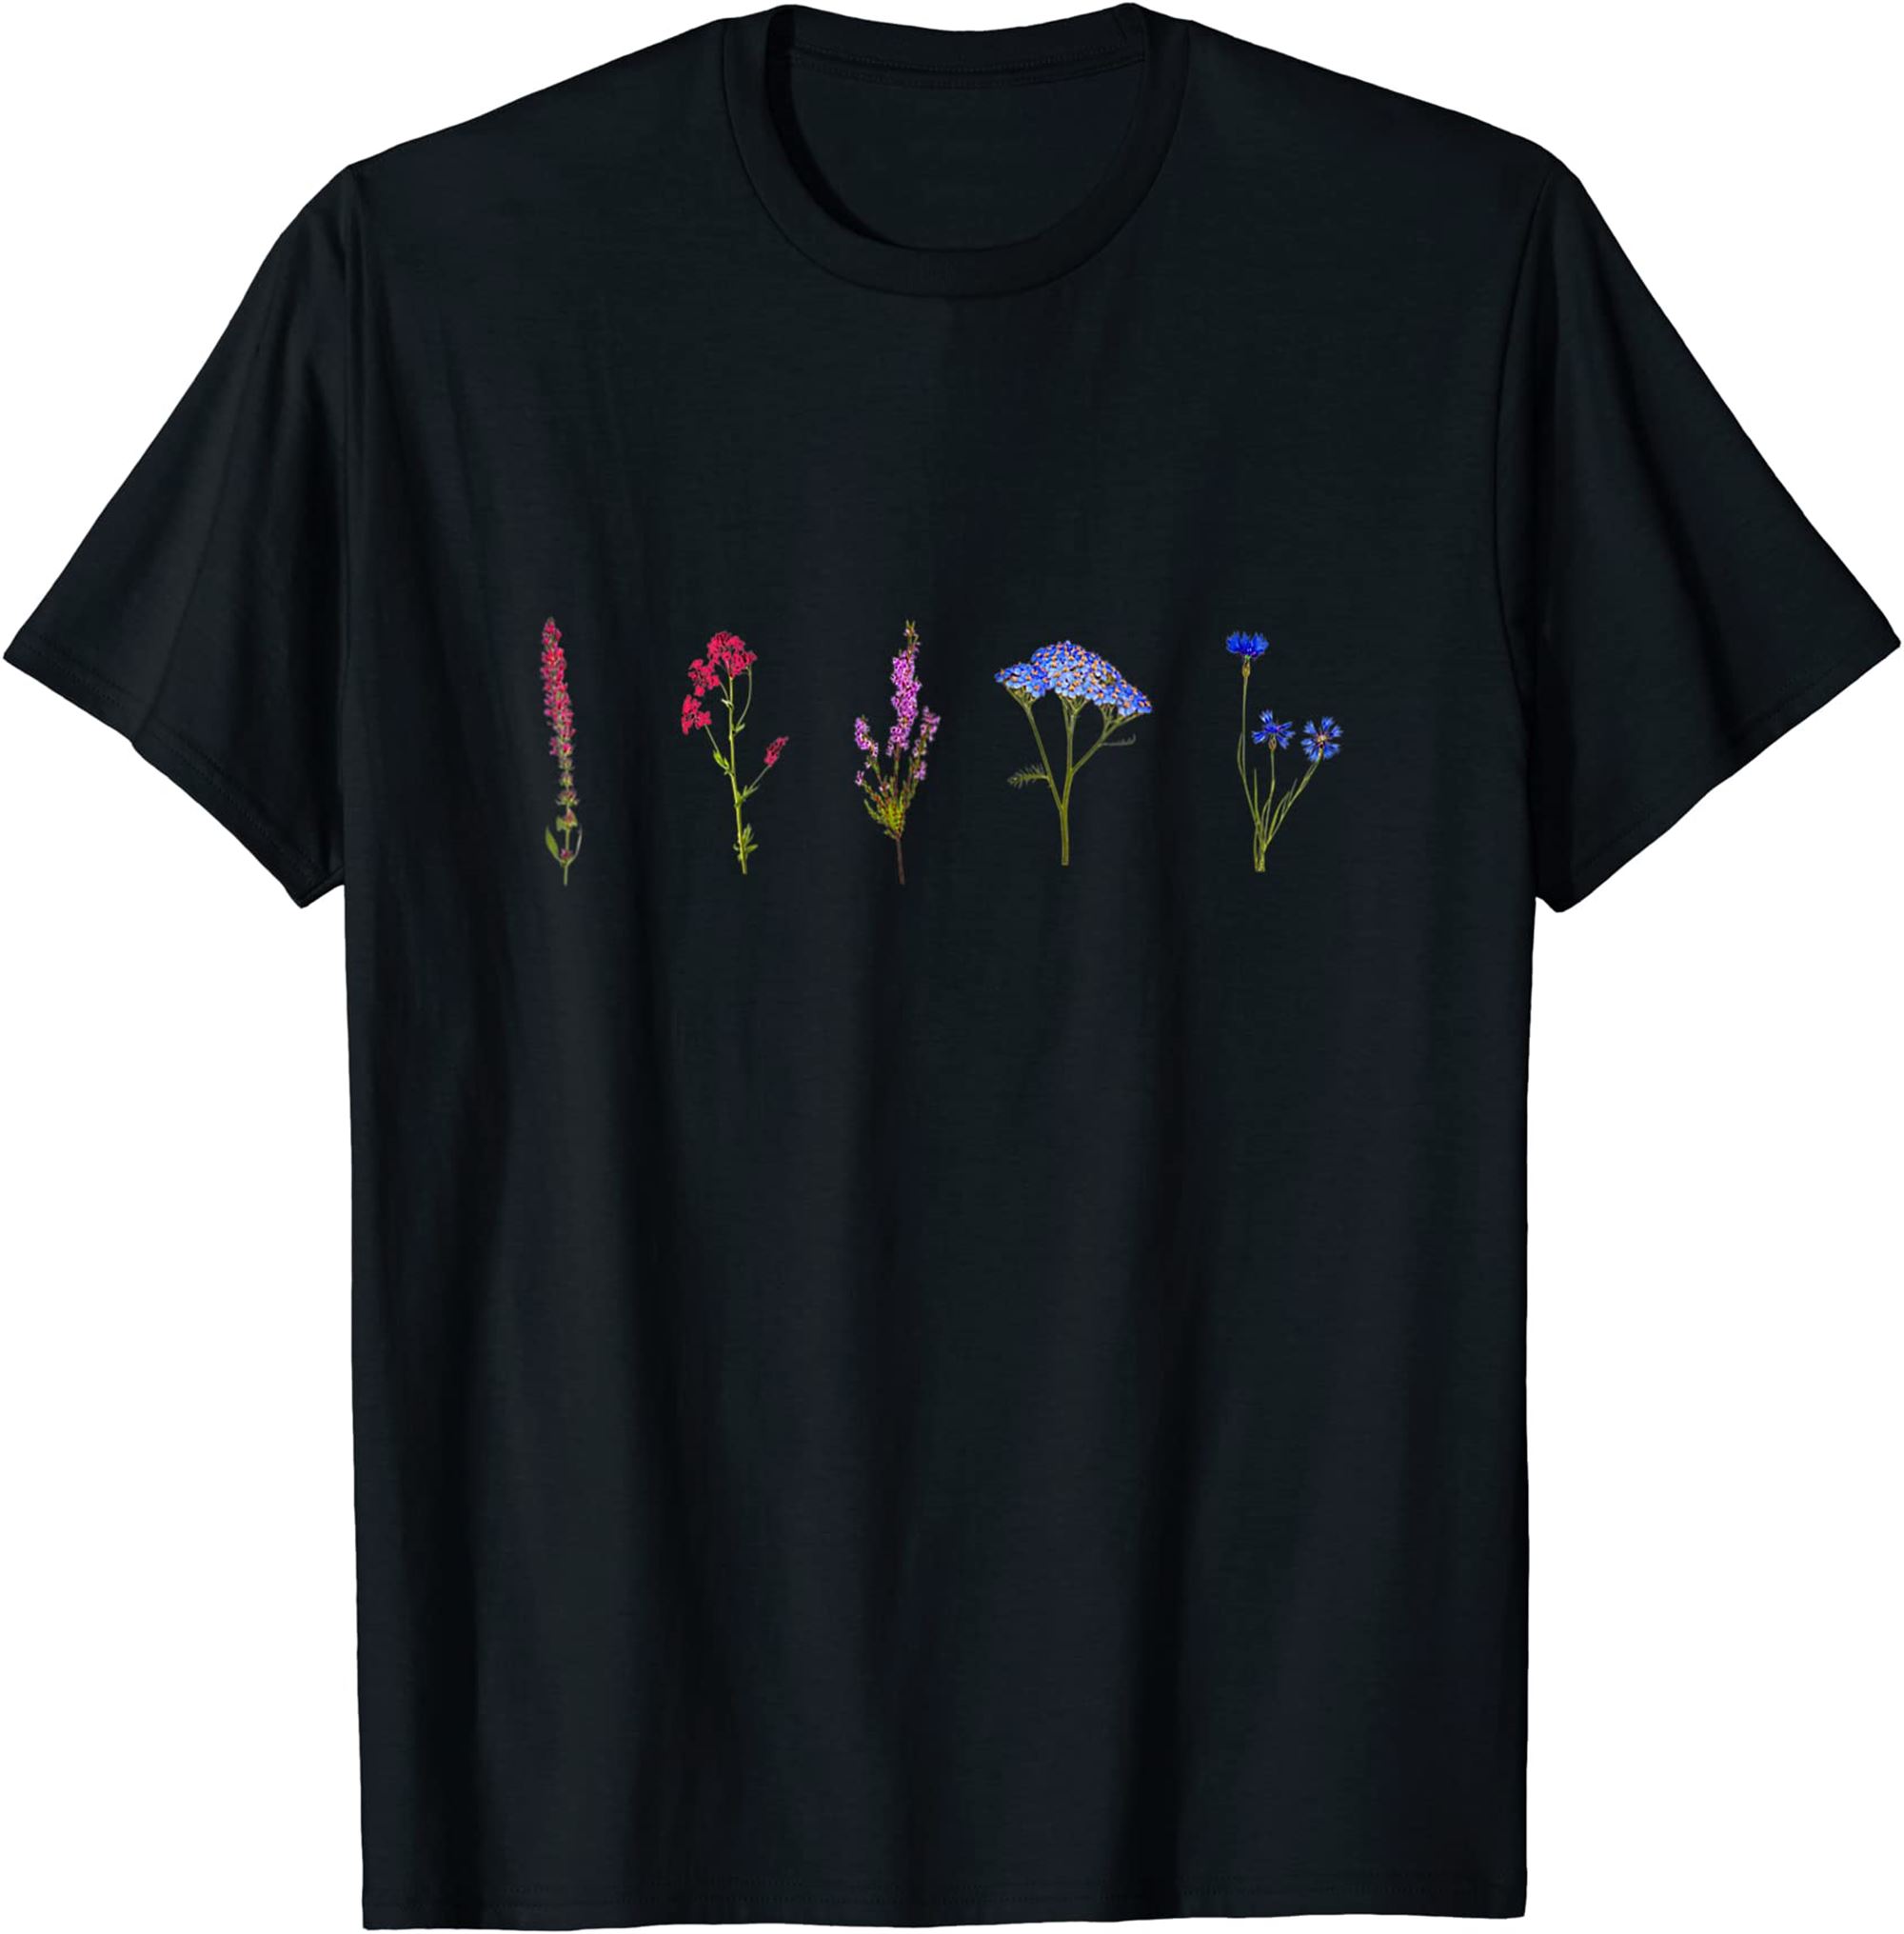 Bisexual Wildflowers Pride Flowers Shirt Subtle Bisexual T-shirt Plus Size Up To 5xl